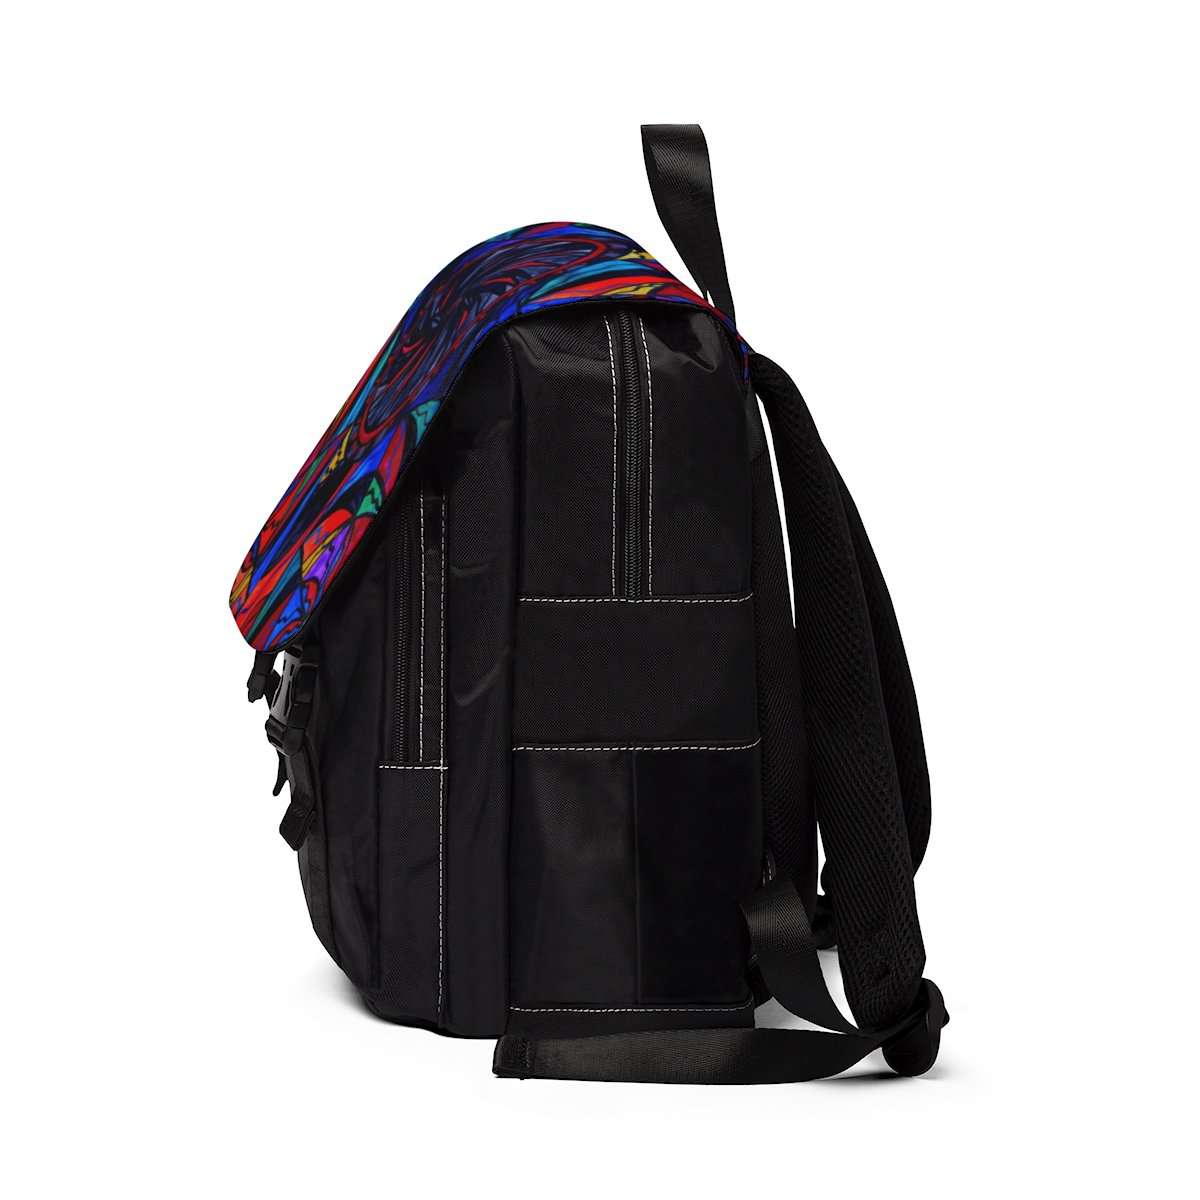 leaking-out-of-your-transforming-fear-unisex-casual-shoulder-backpack-hot-on-sale_2.jpg